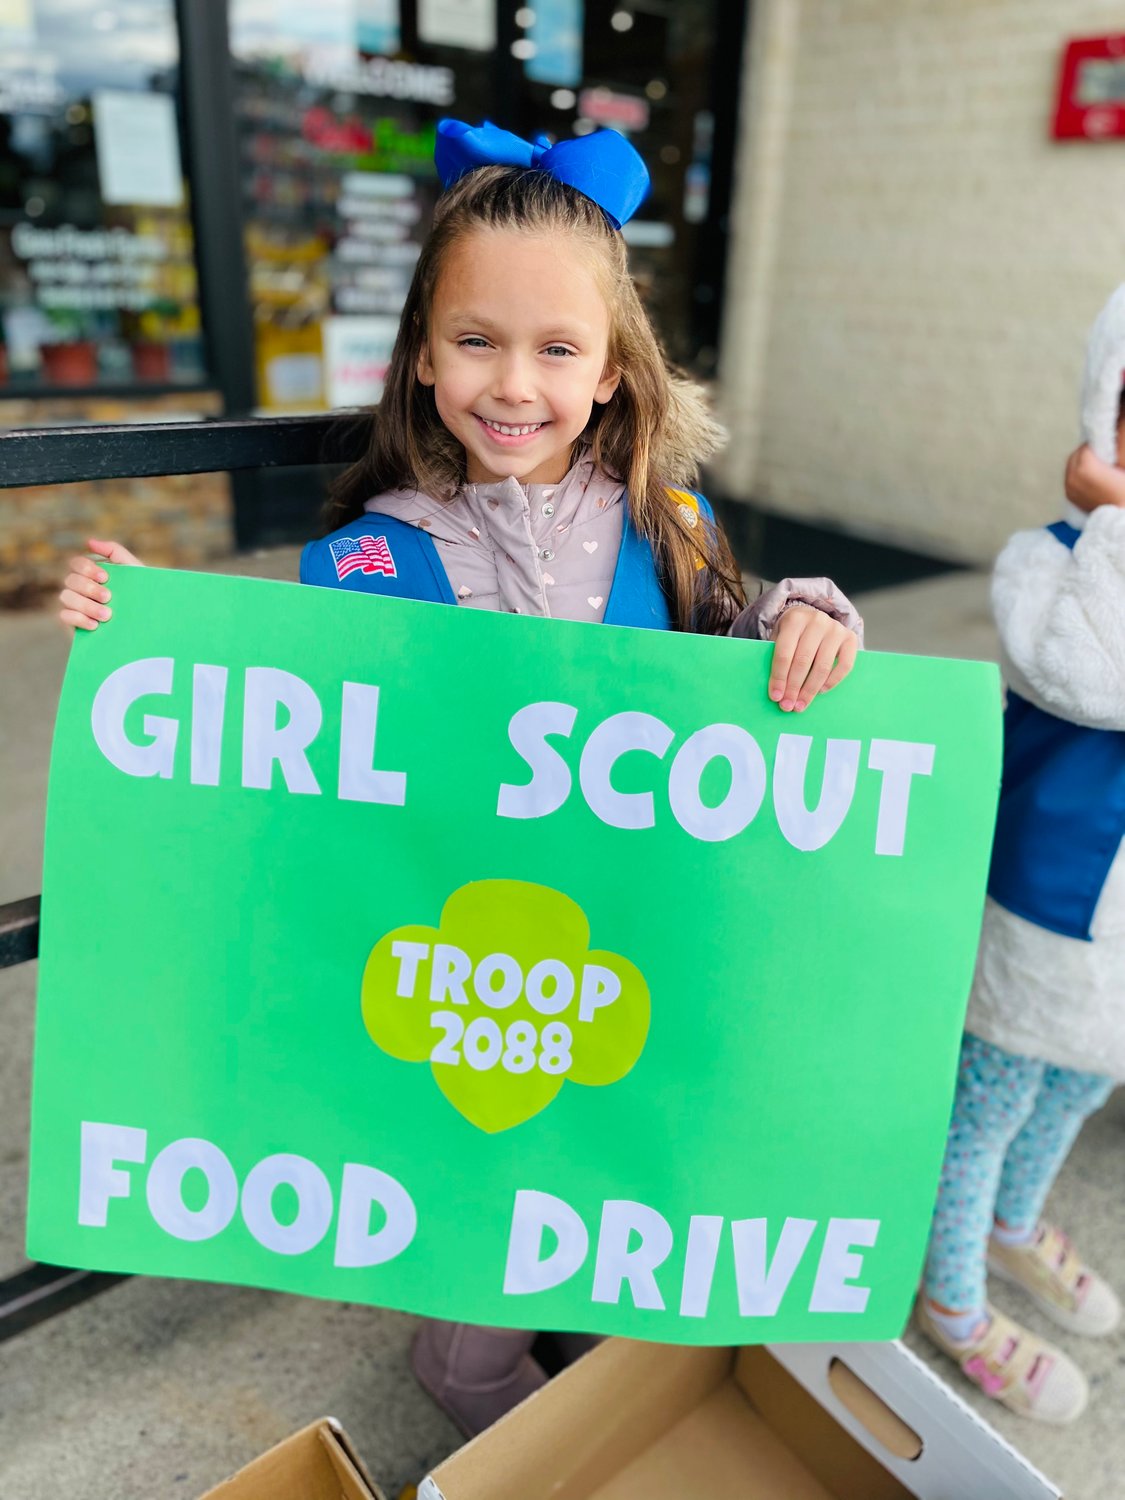 Kaylee Ricca, of Girl Scout Troop 2088, helped collect food for the needy this Thanksgiving.